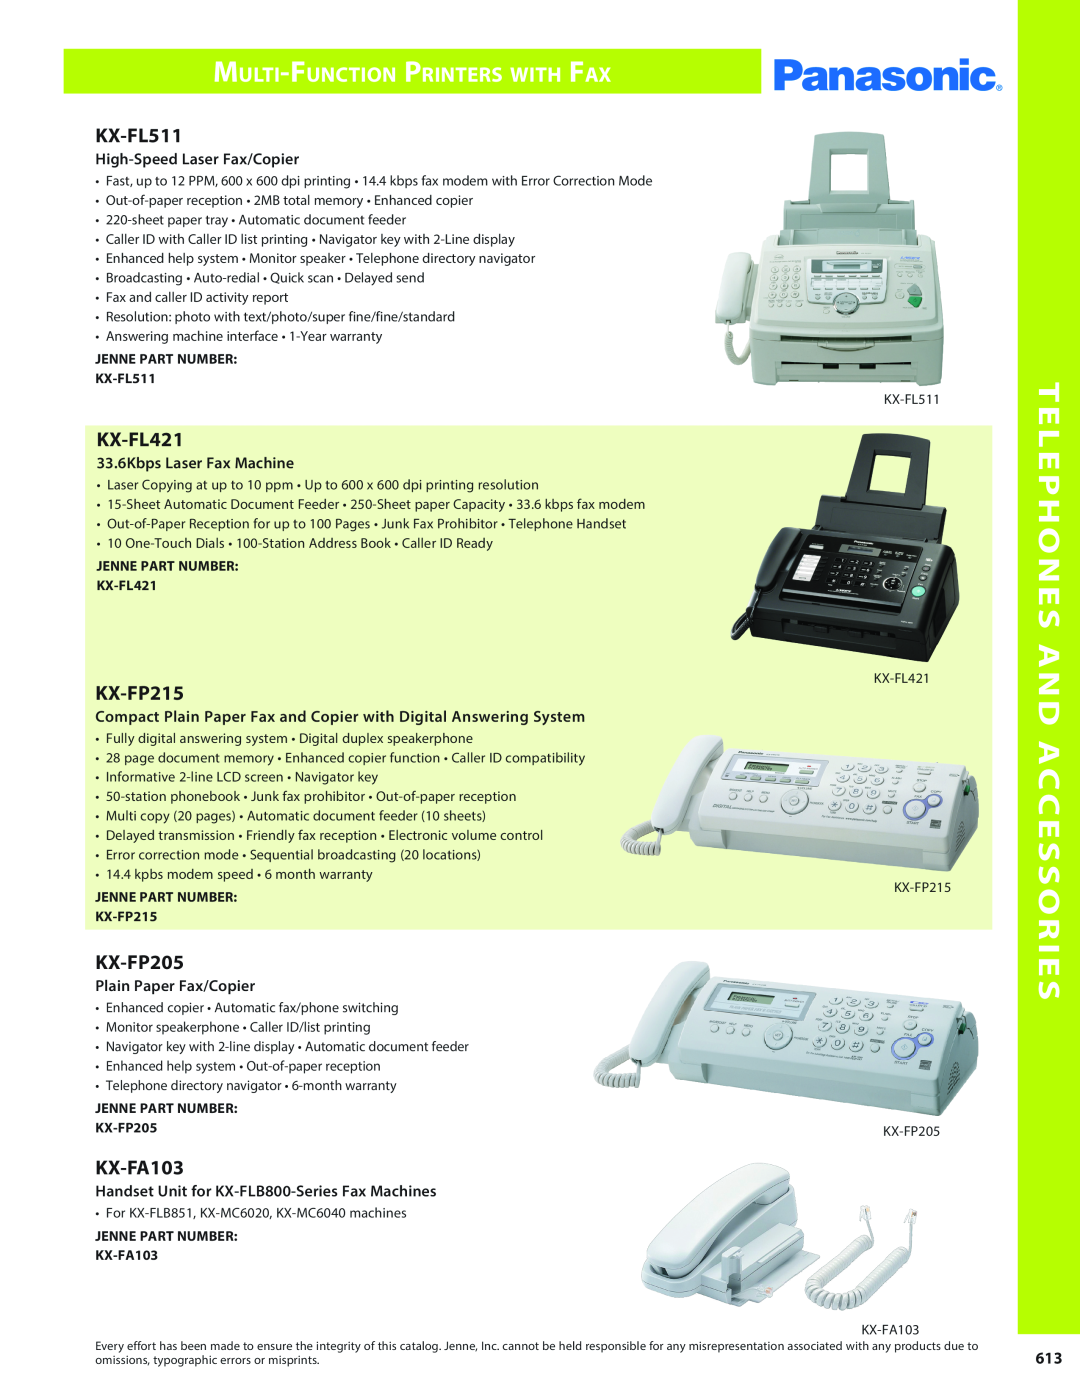 Panasonic PMPU2000 manual Telephones And Accessories, Multi-Function Printers with Fax, High-SpeedLaser Fax/Copier 